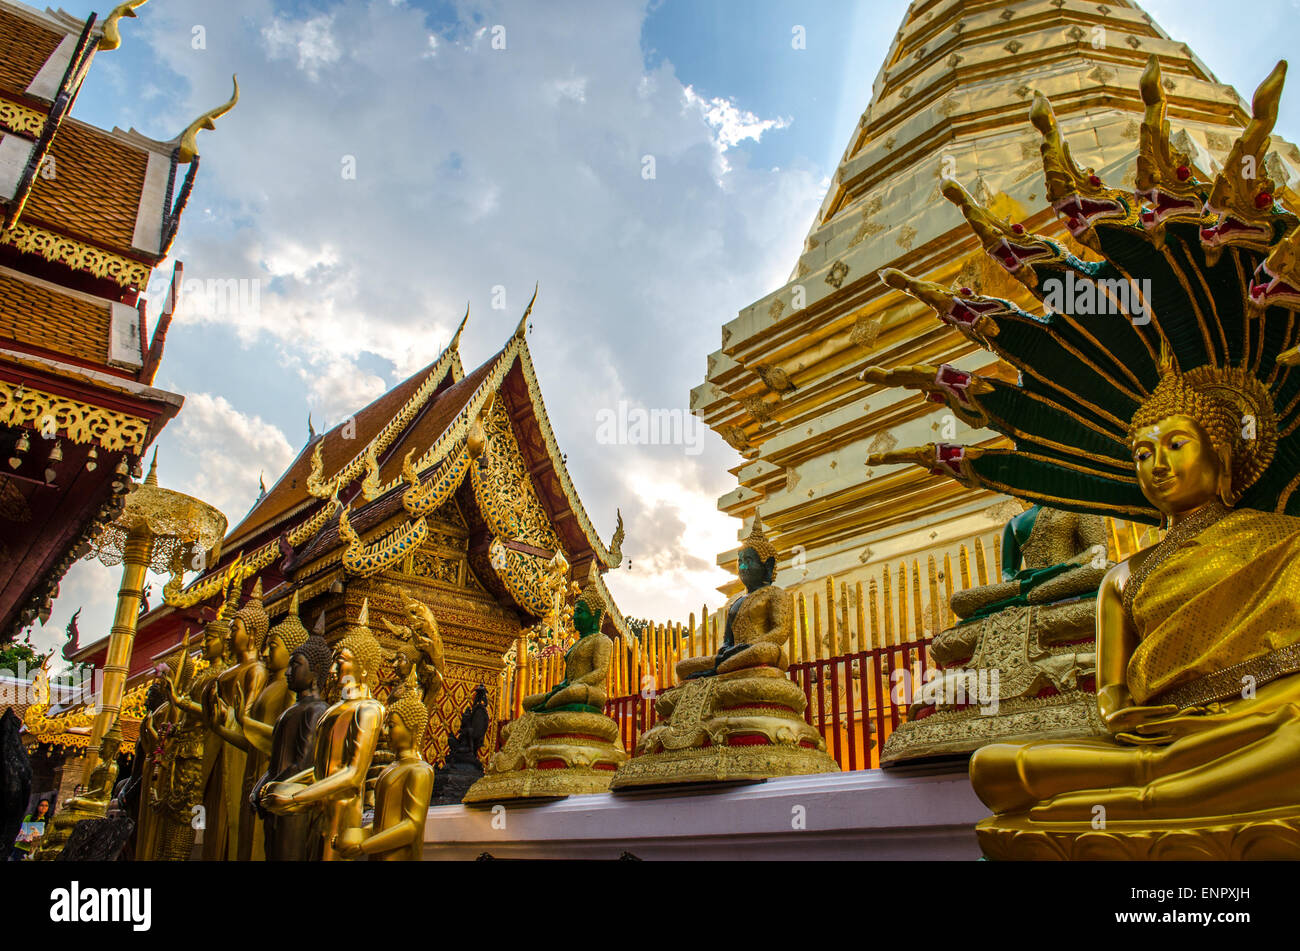 A glimpse of golden enlightenment at Wat Phra That Doi Suthep, Chiang Mai, Thailand, May 2015. Stock Photo